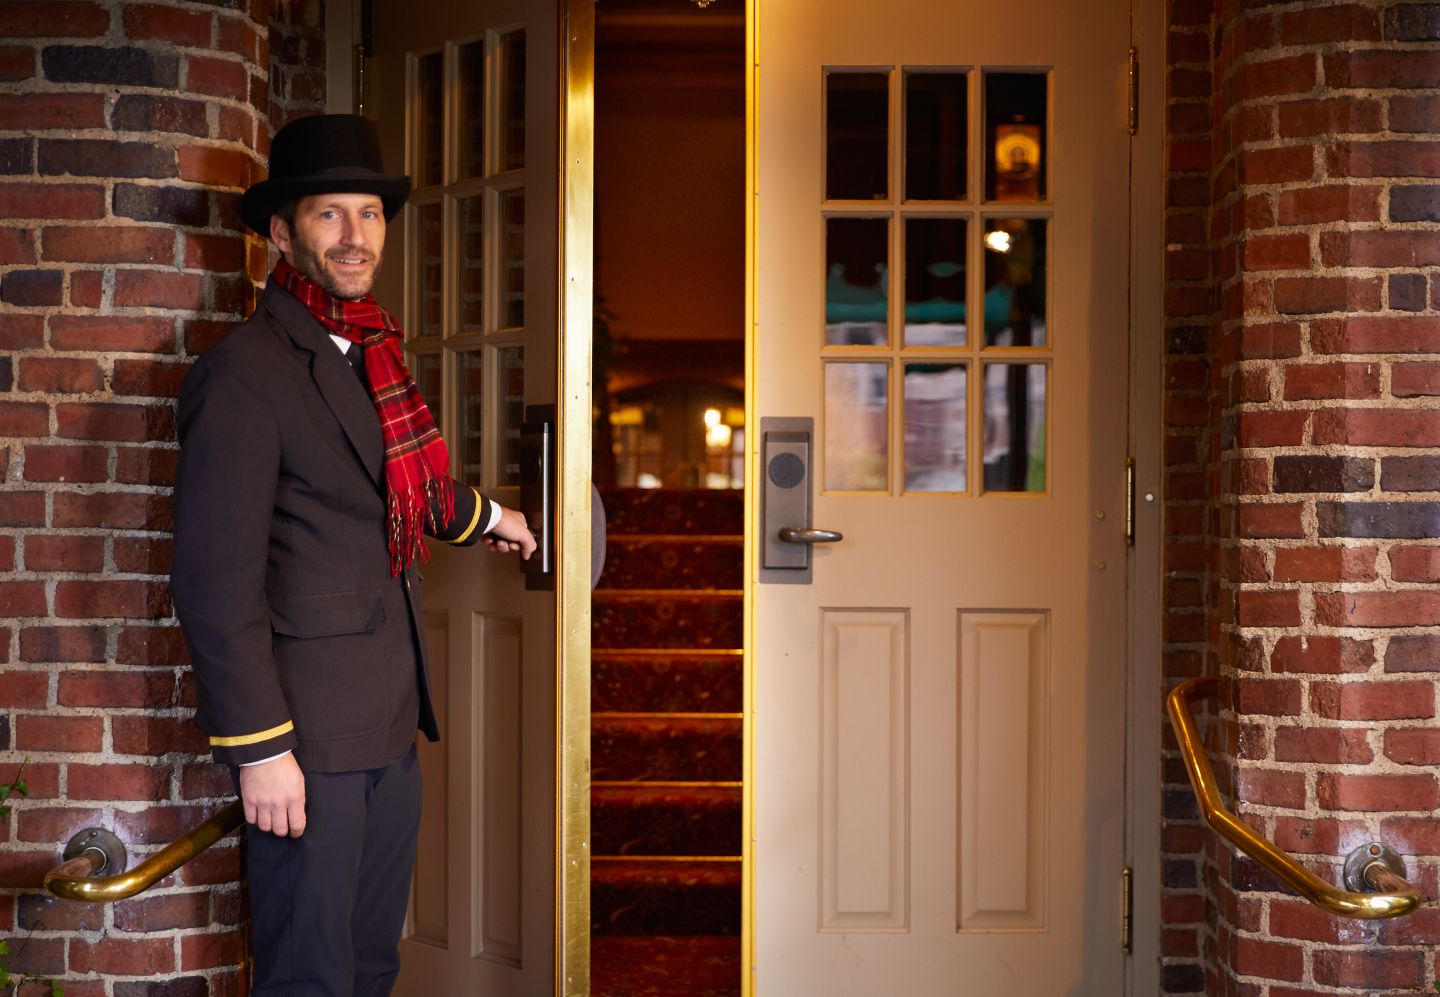 A bellman opens the entrance door of The American Club while smiling and wearing a red scarf